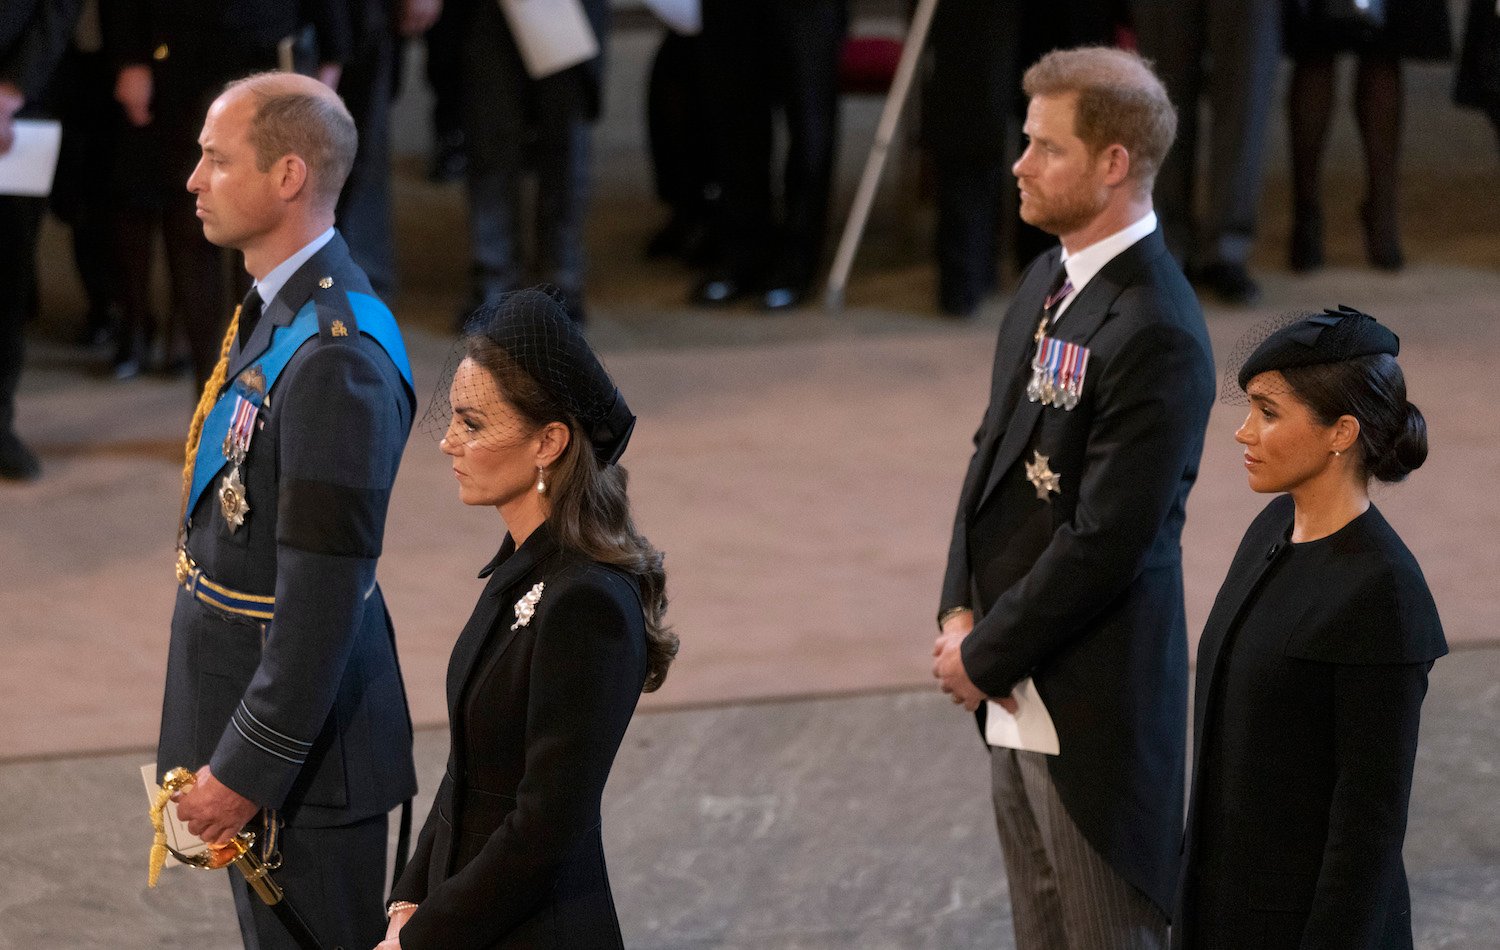 Prince William, Kate Middleton, Prince Harry, Meghan Markle body language at Queen Elizabeth funeral